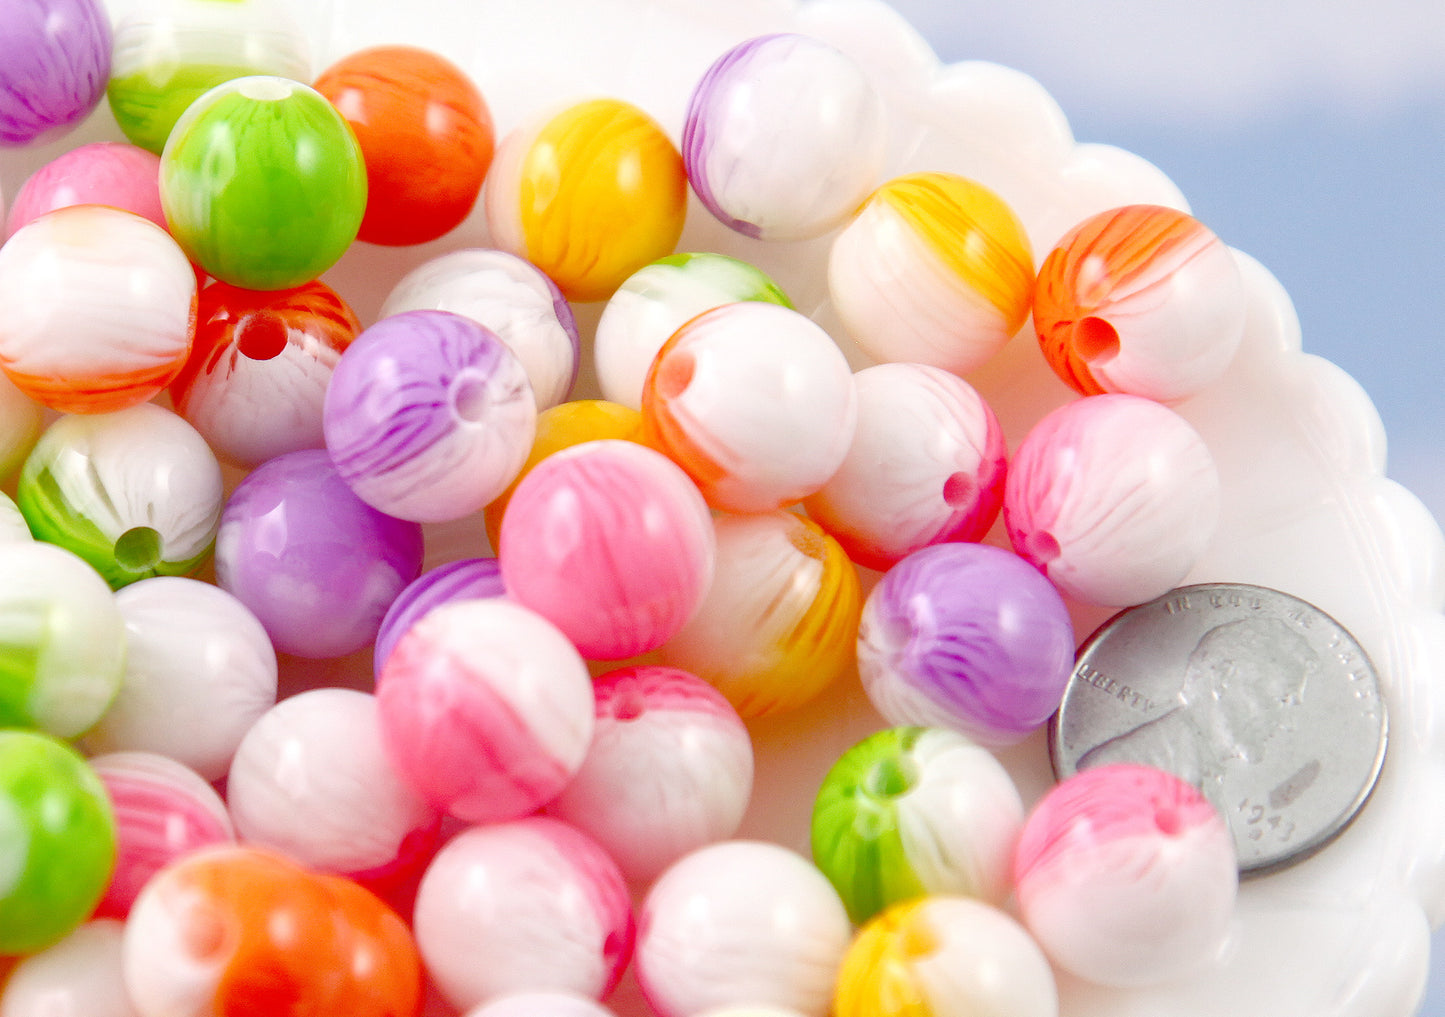 Cute Resin Beads - 12mm Pastel Candy Two Tone Marble Stripe Acrylic or Resin Beads - mixed color, small size beads - 50 pcs set